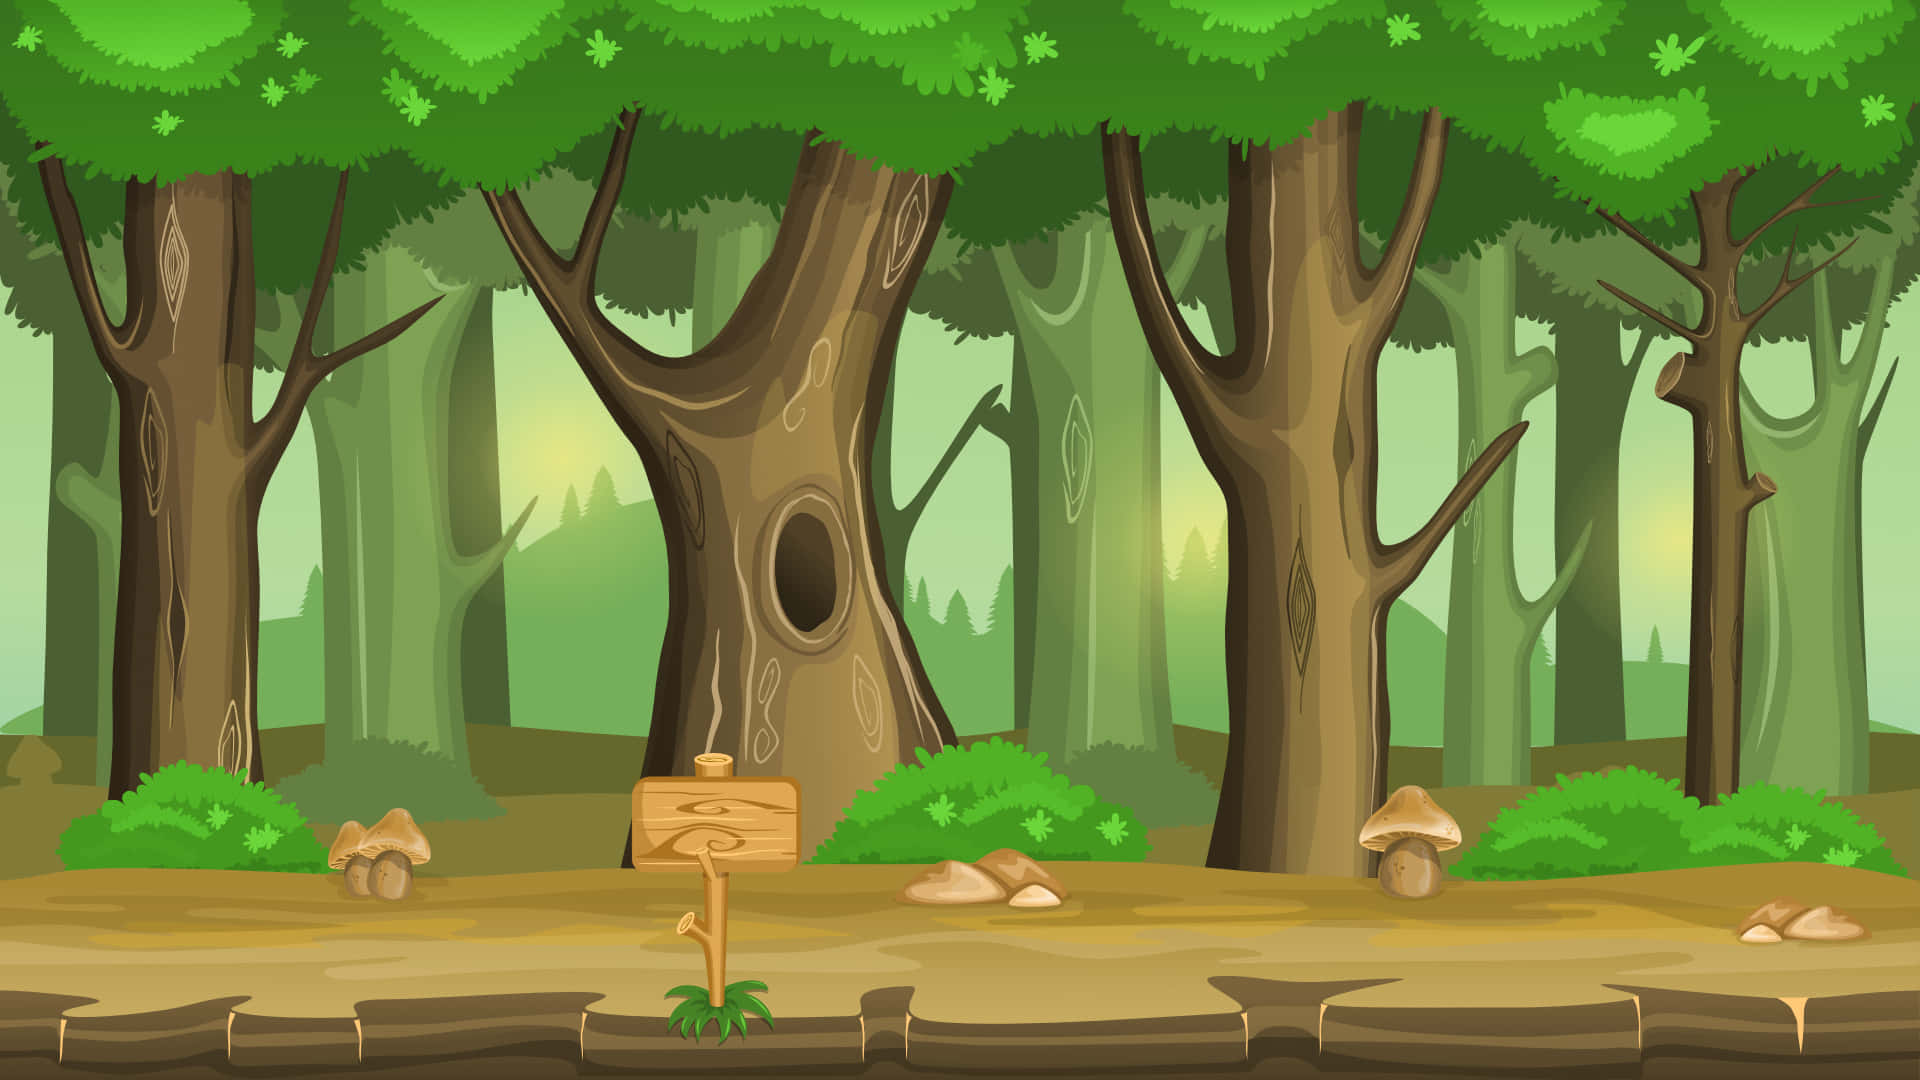 A Pictur of a Magical Animated Forest